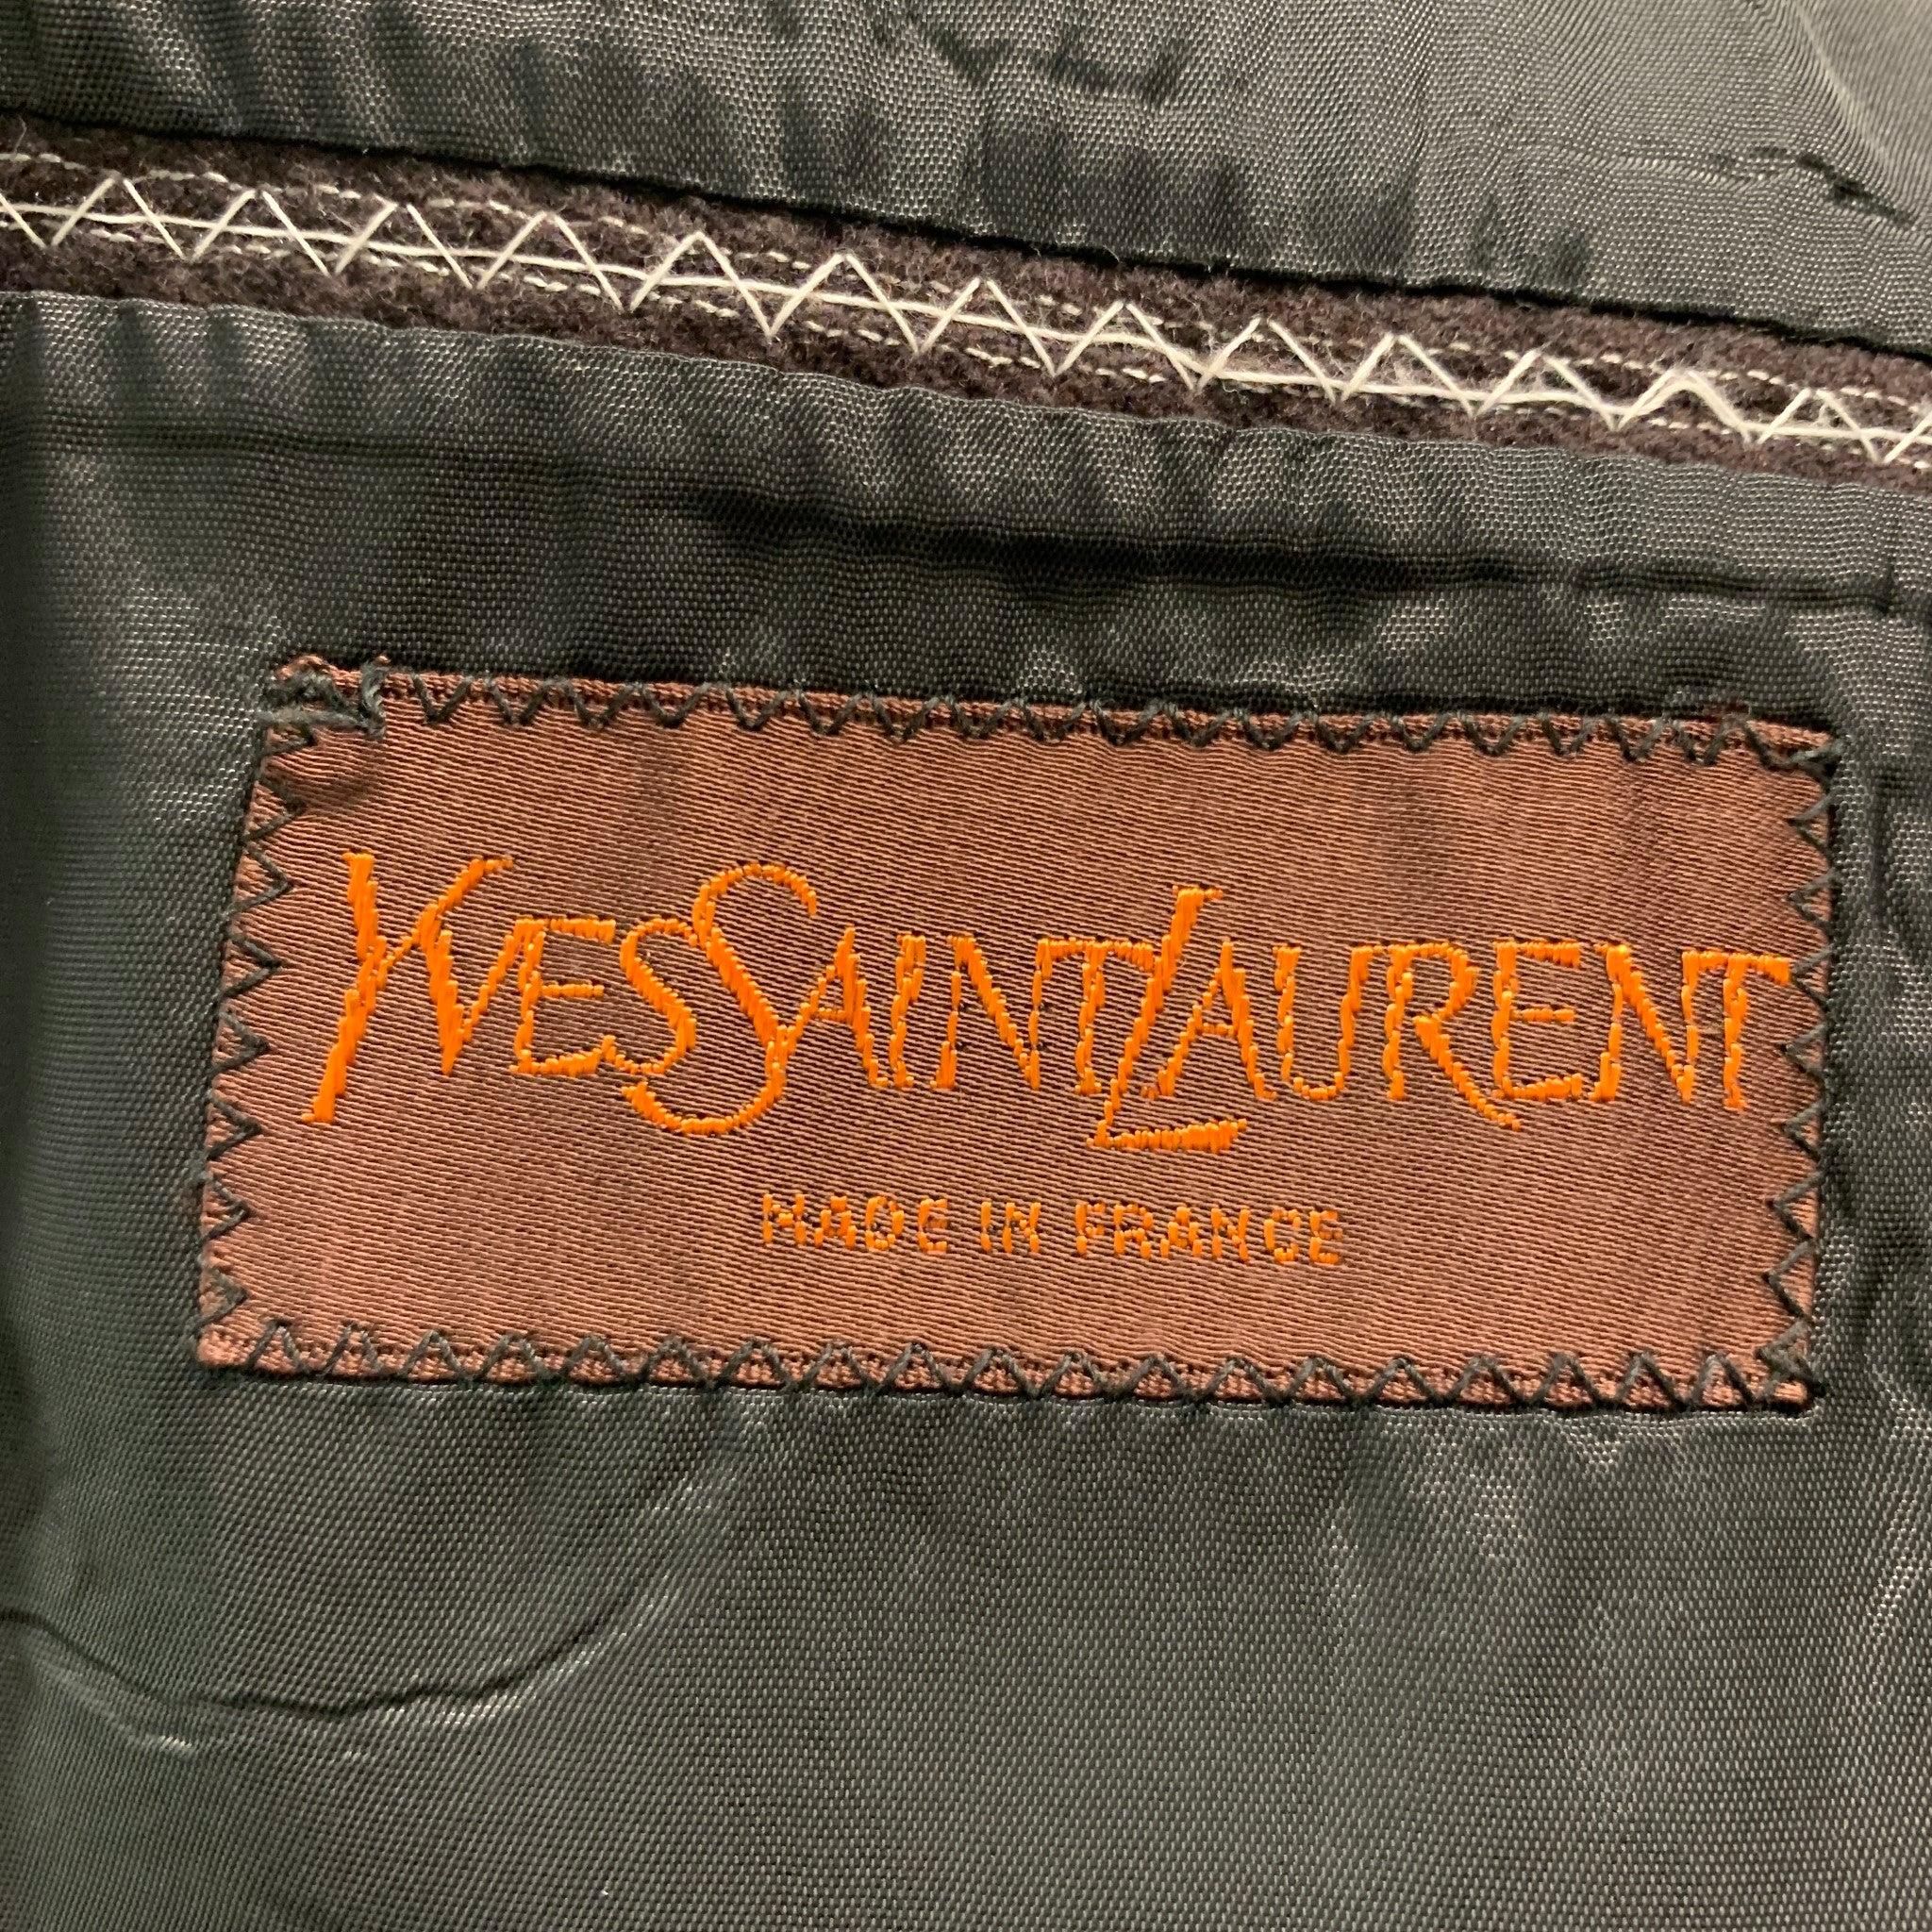 YVES SAINT LAURENT Chest Size 40 Brown White Pinstripe Single breasted 32 Suit For Sale 5